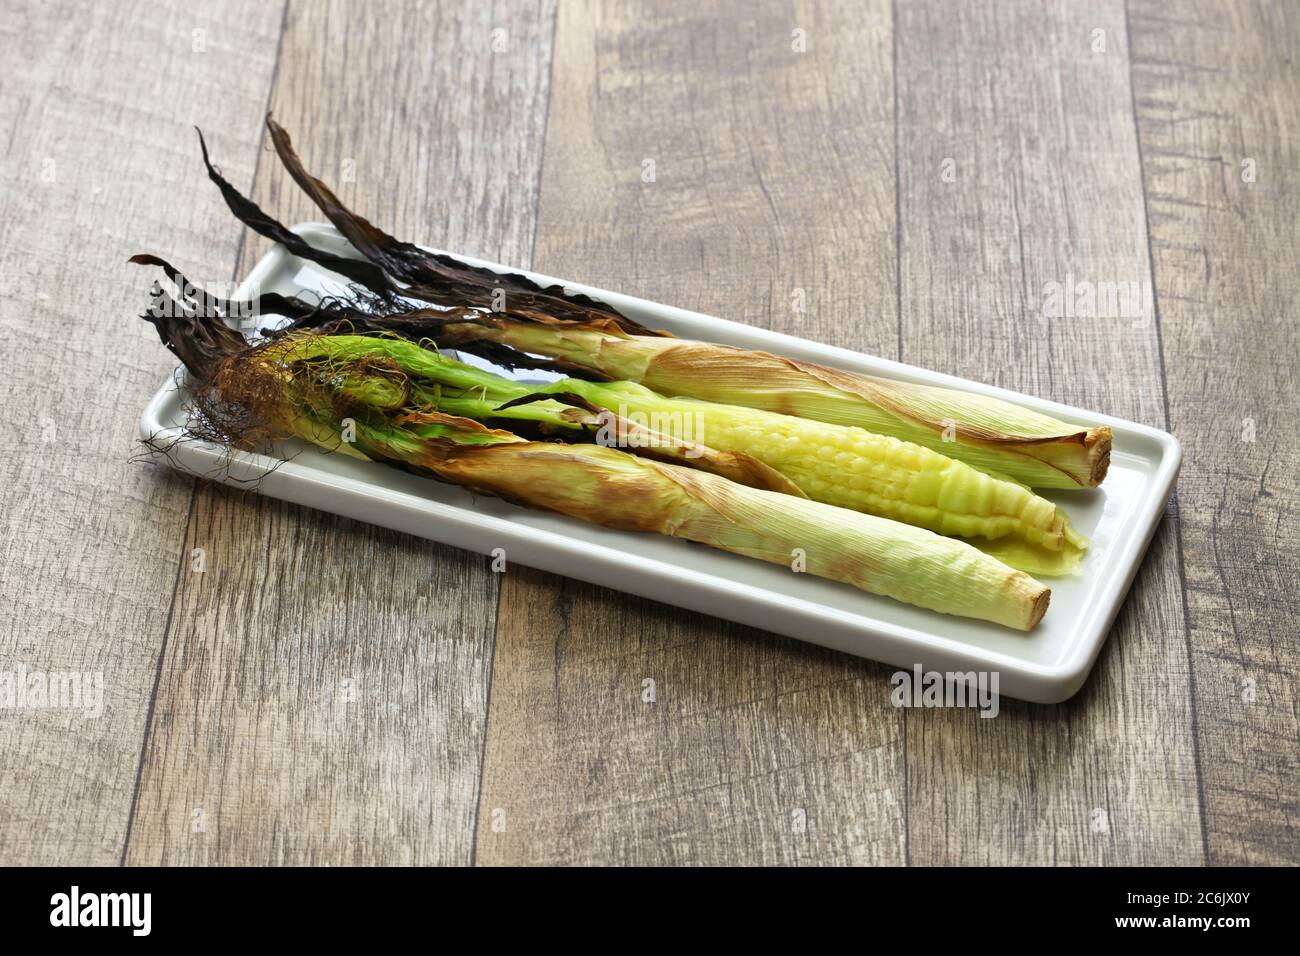 grilled whole baby corn, appetizer Stock Photo